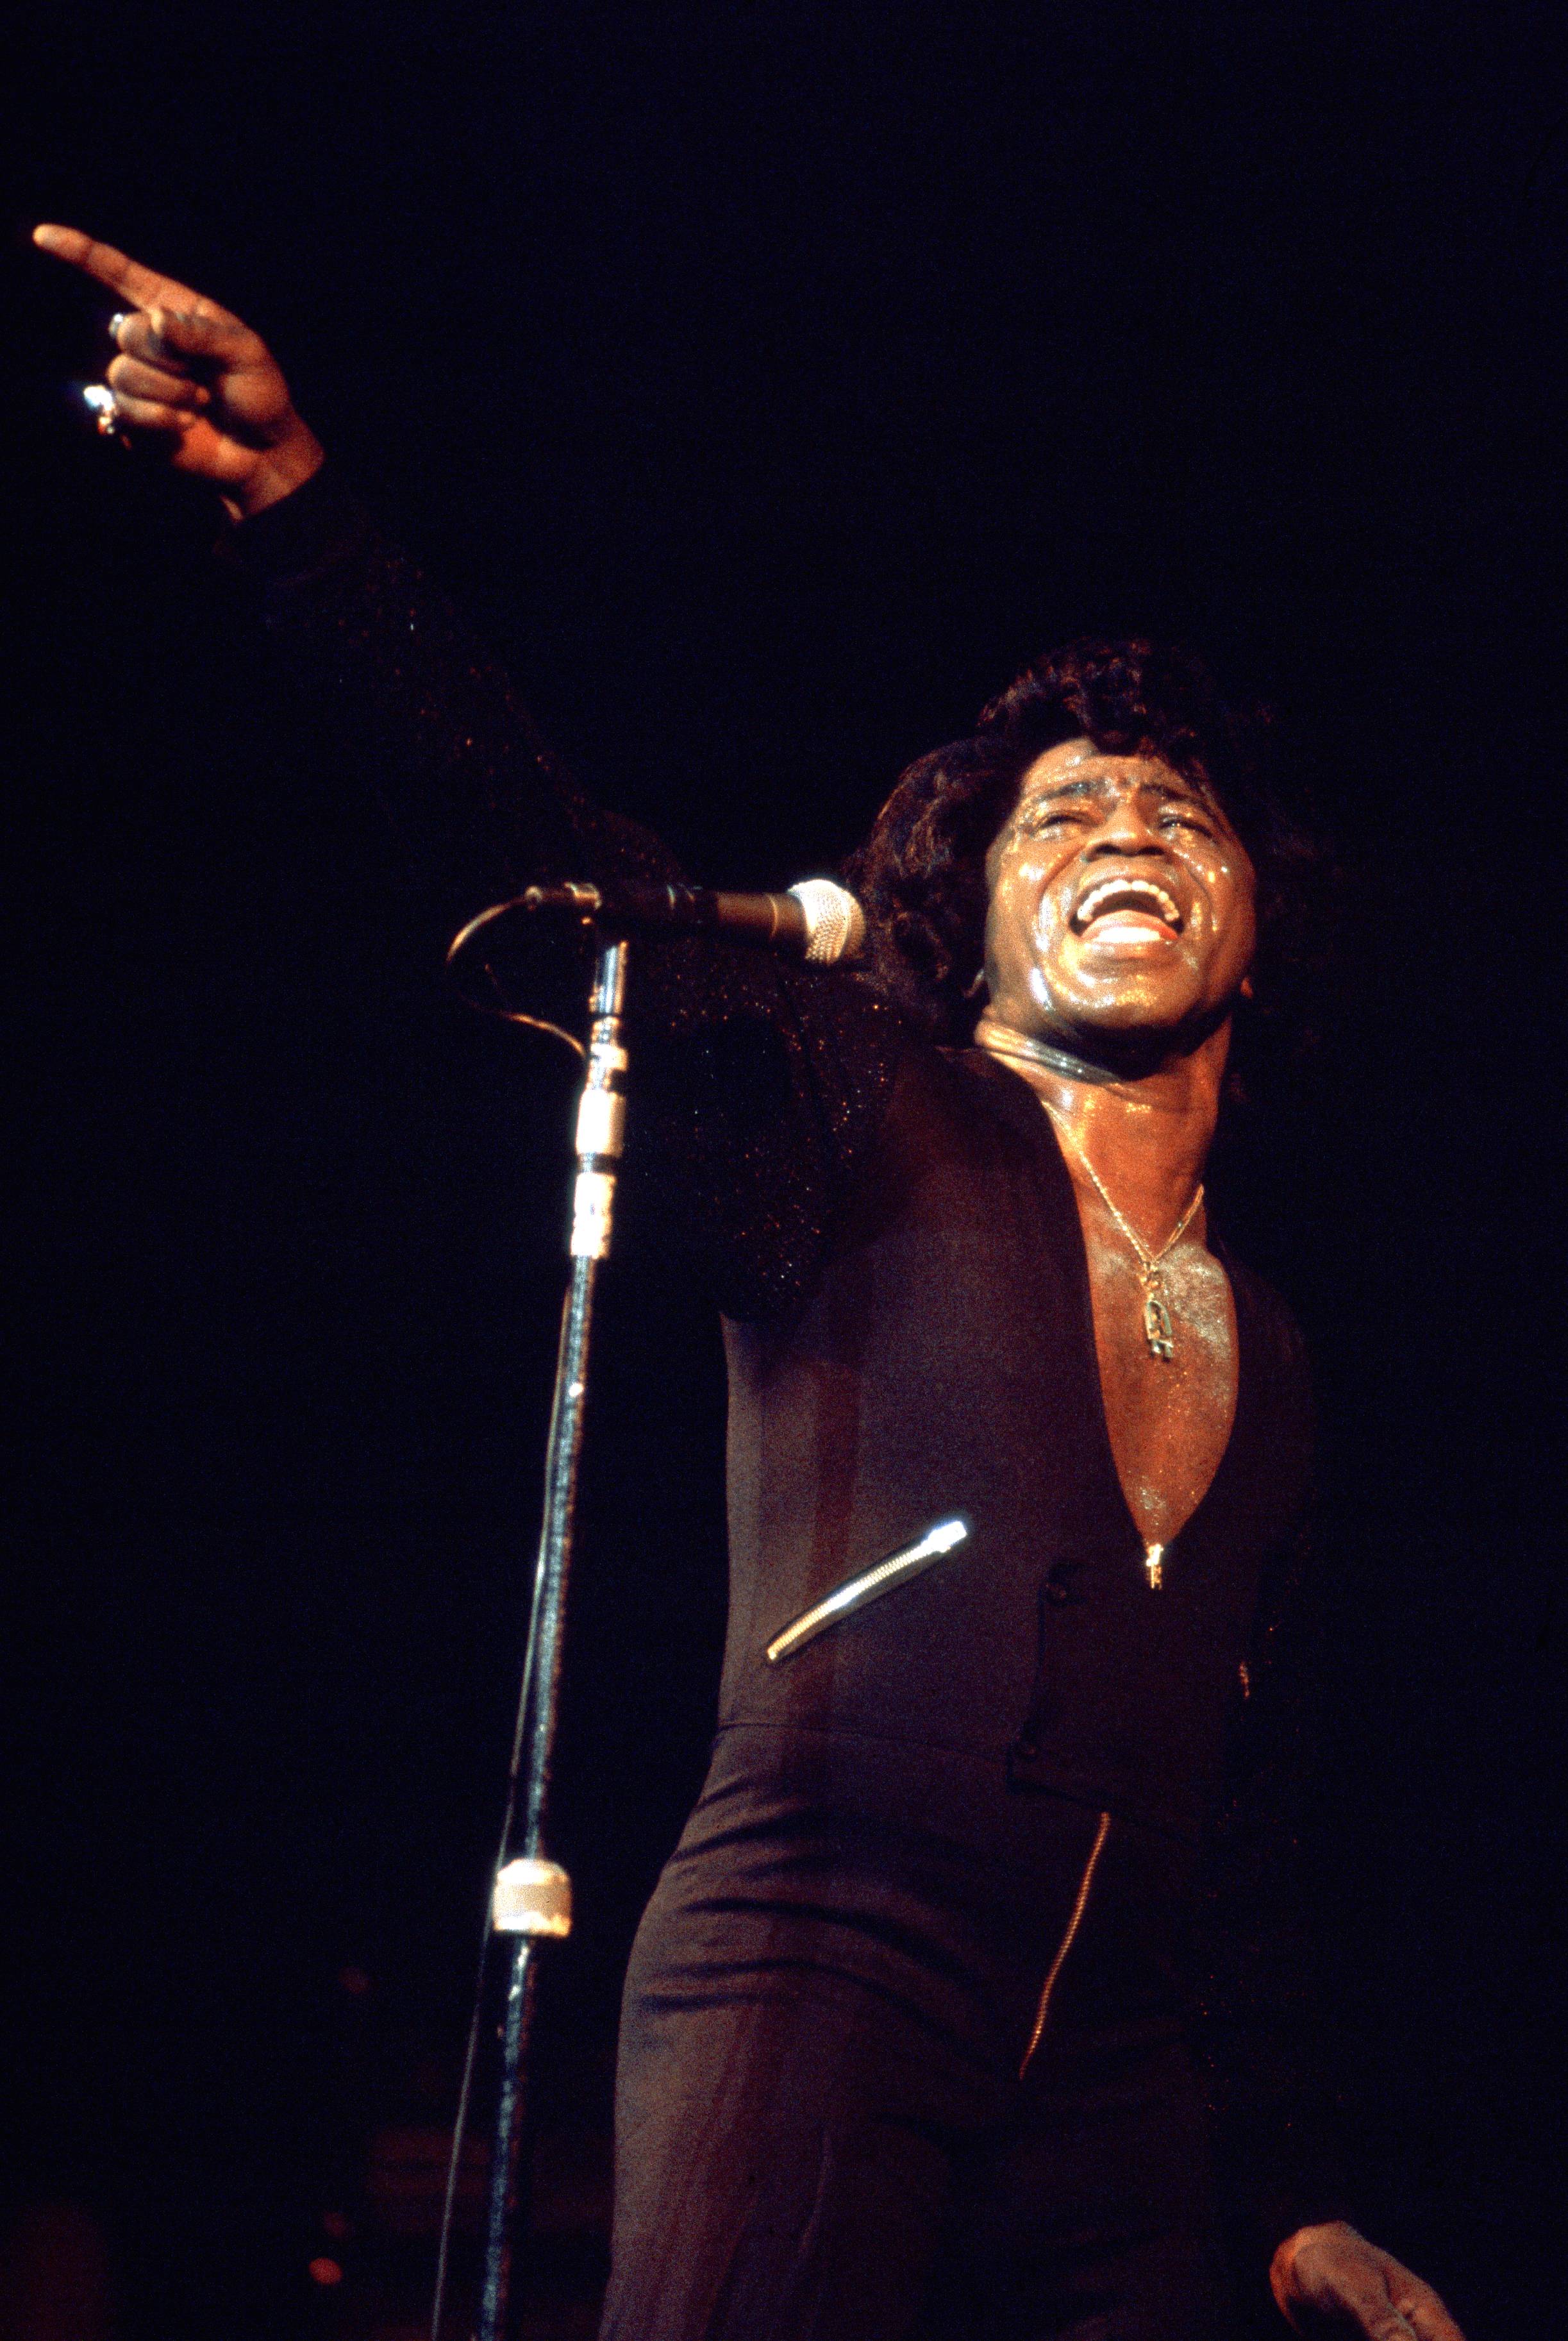 James Brown performs live on stage at the Midem music conference in Cannes, France in January 1981 | Source: Getty Images